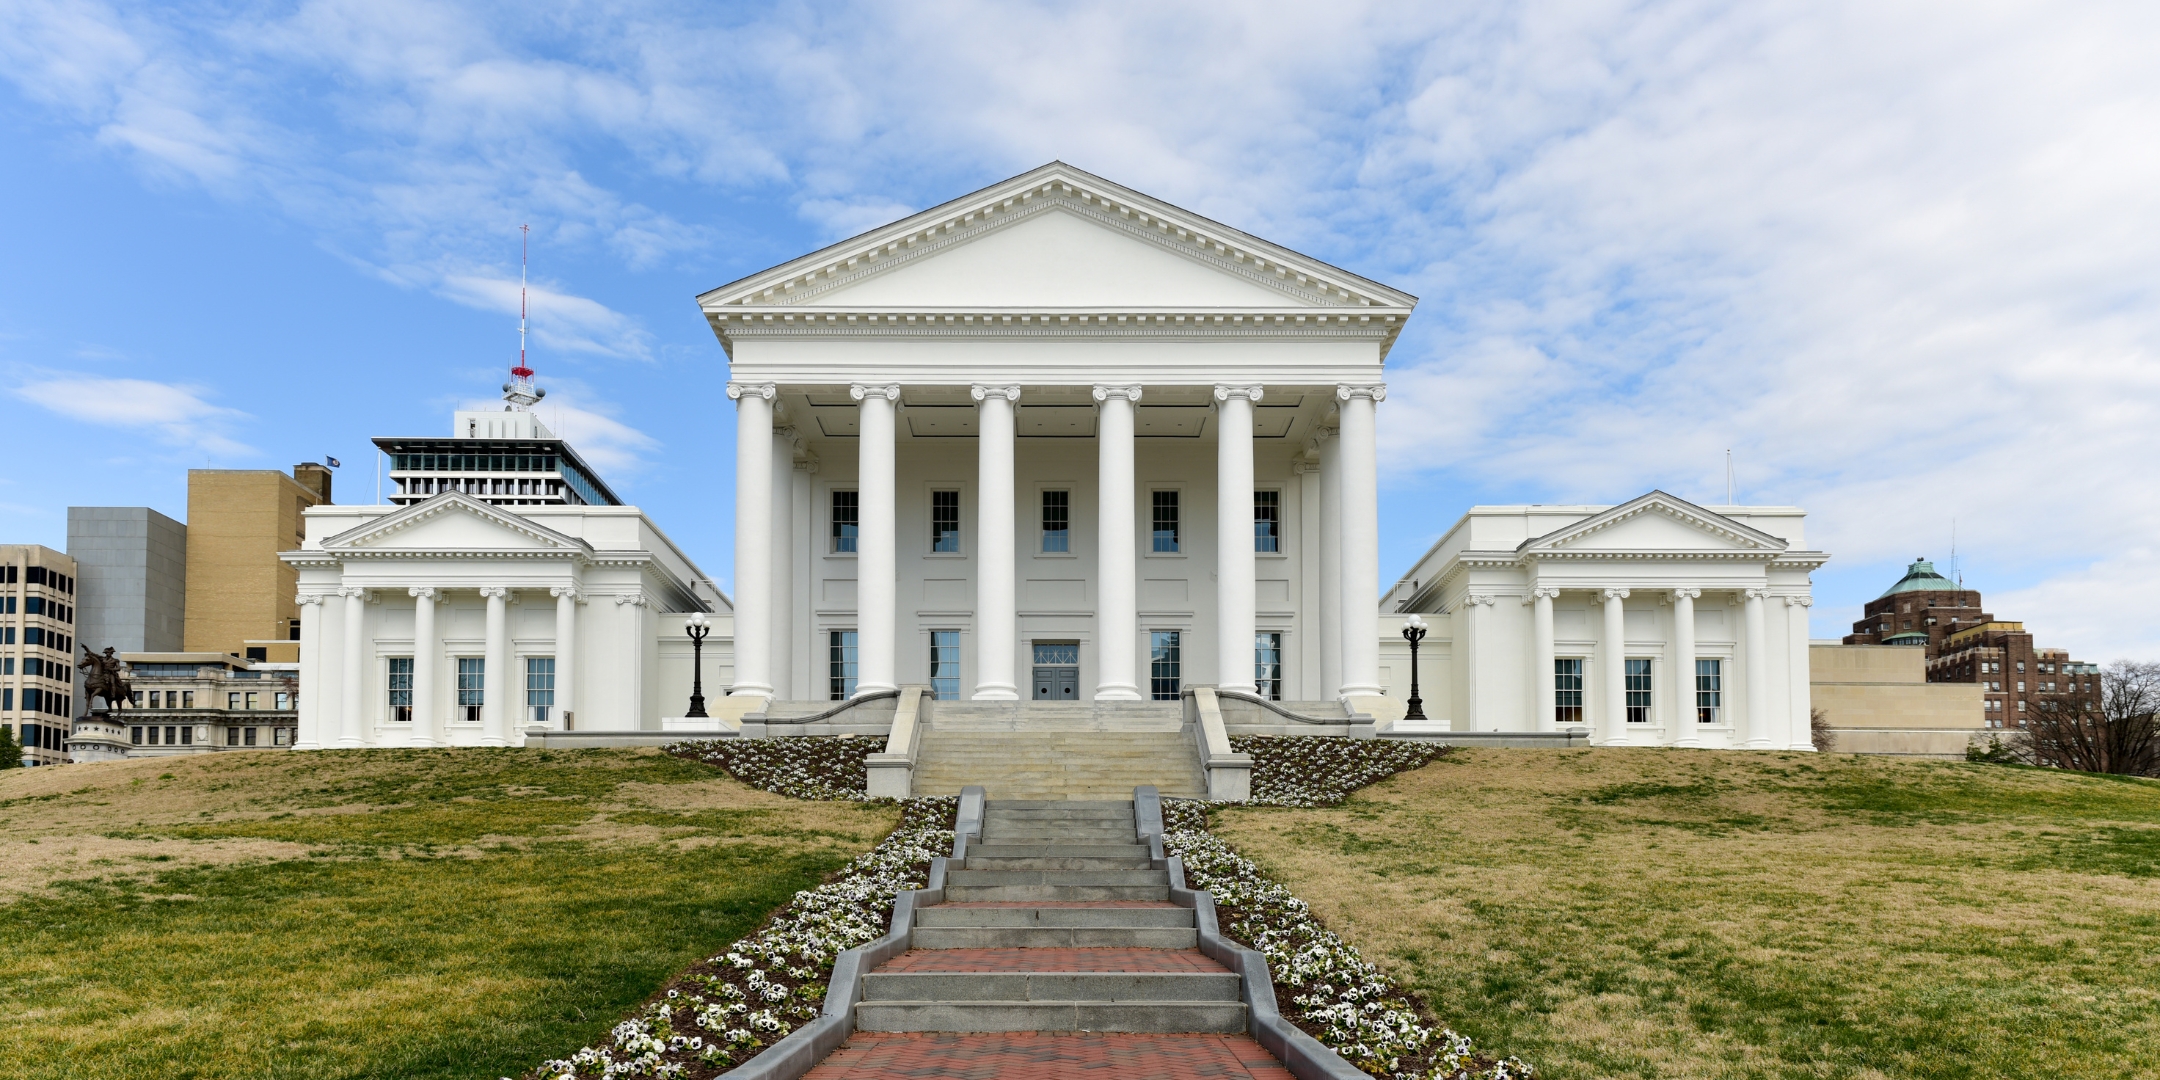 image of the white Virginia State Capitol building in Richmond